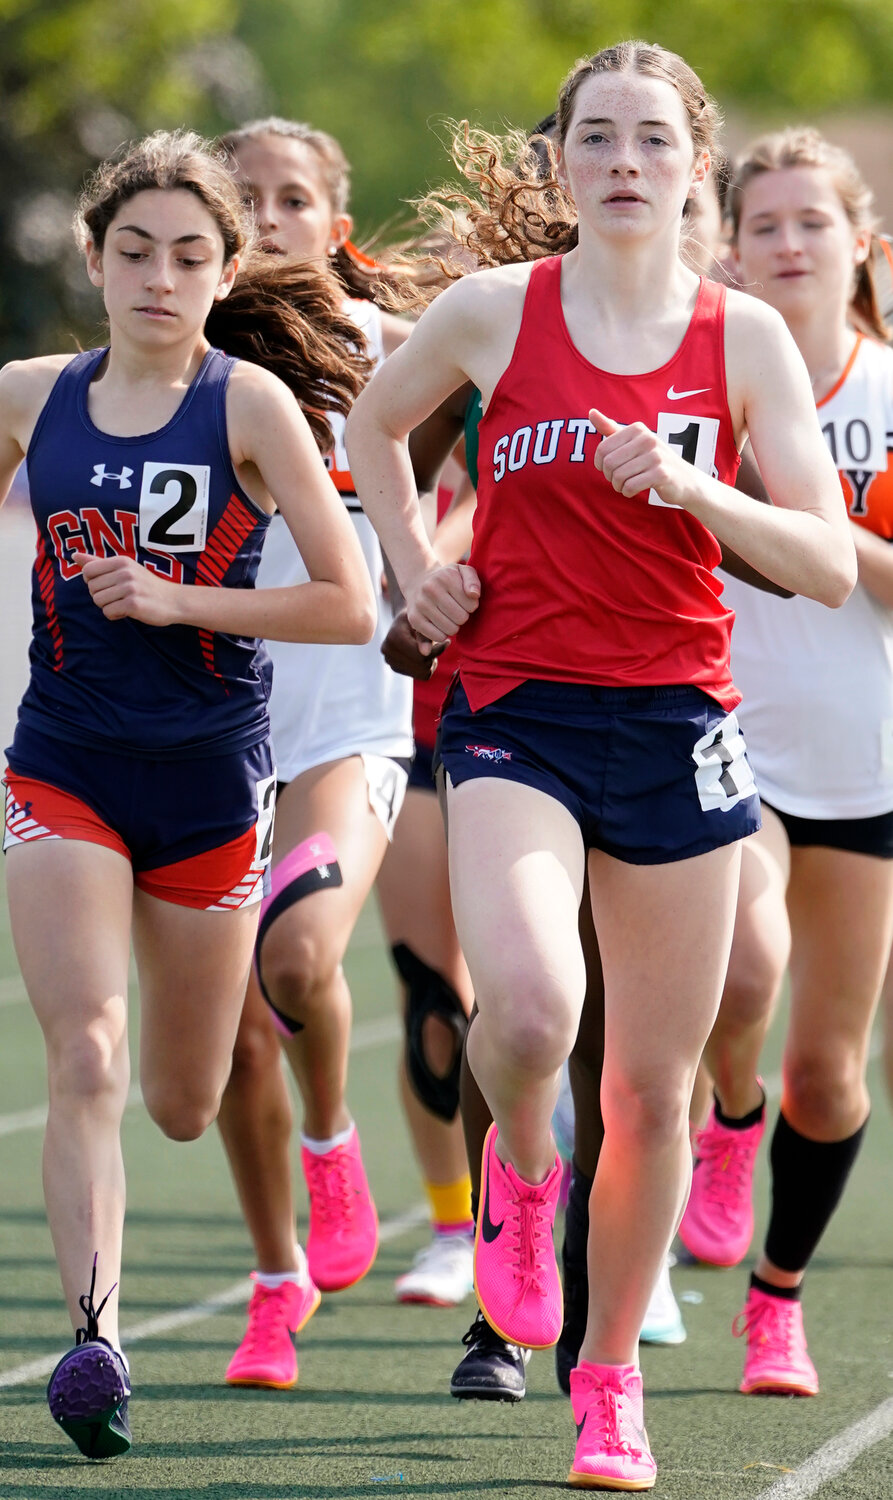 Claire Bohan, right, was a double county champion in Nassau Class AA track and field, capturing the 1500- and 3000-meter races.